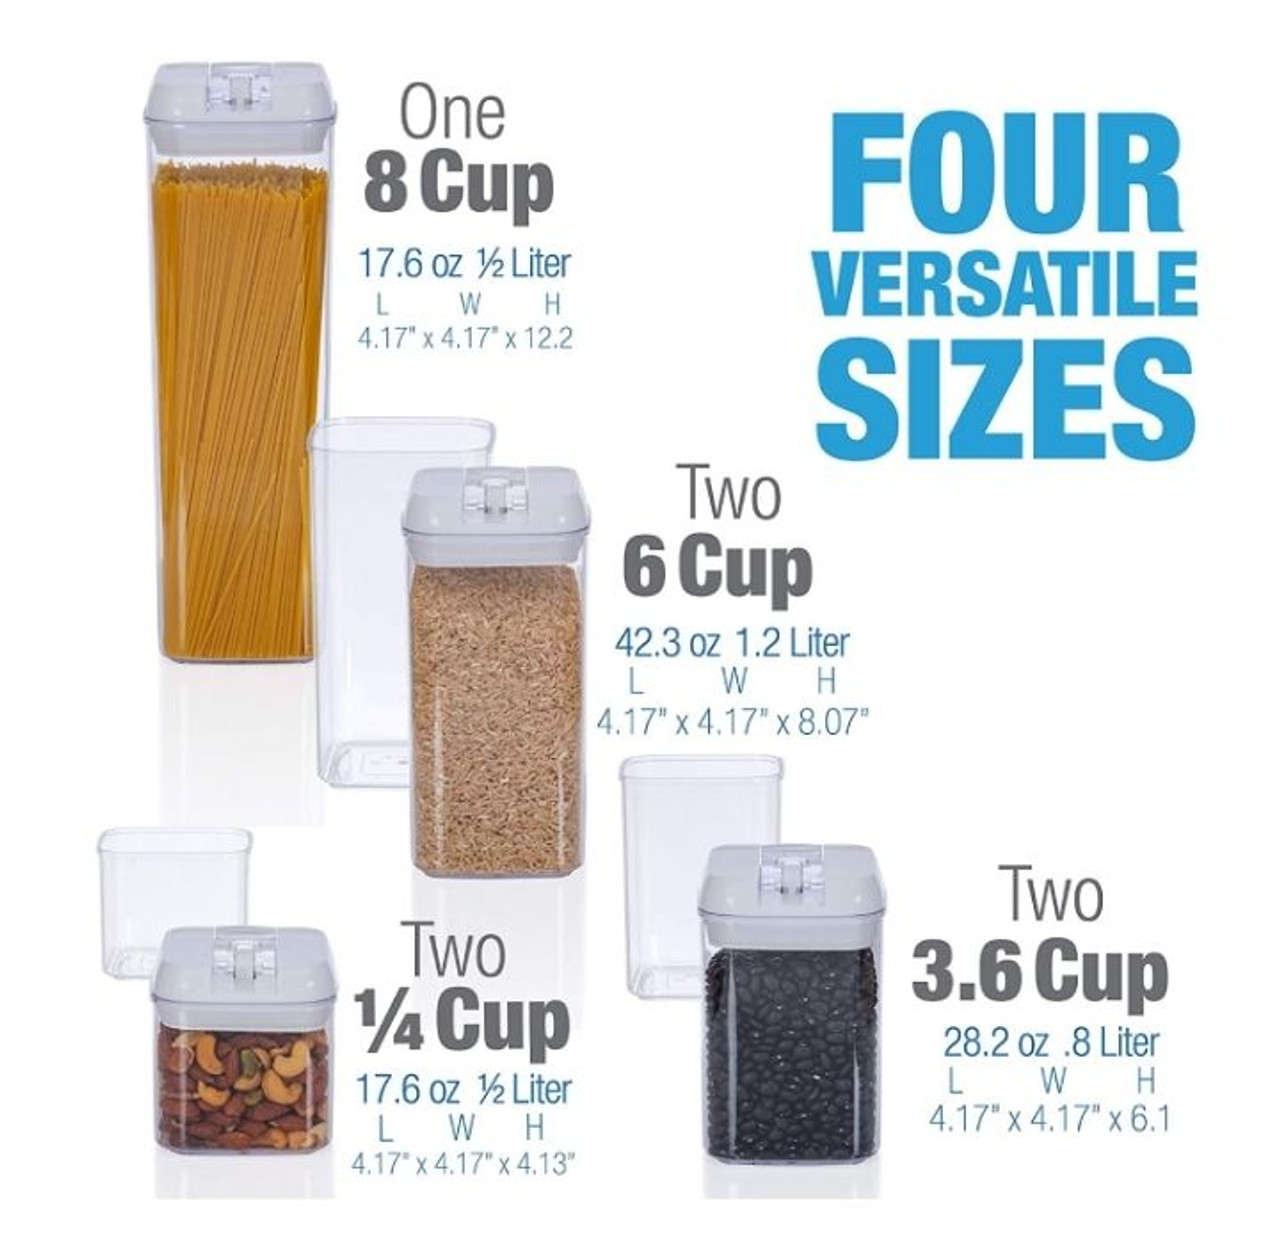 Tobeape® 7 Pack Airtight Food Storage Containers Set, BPA Free